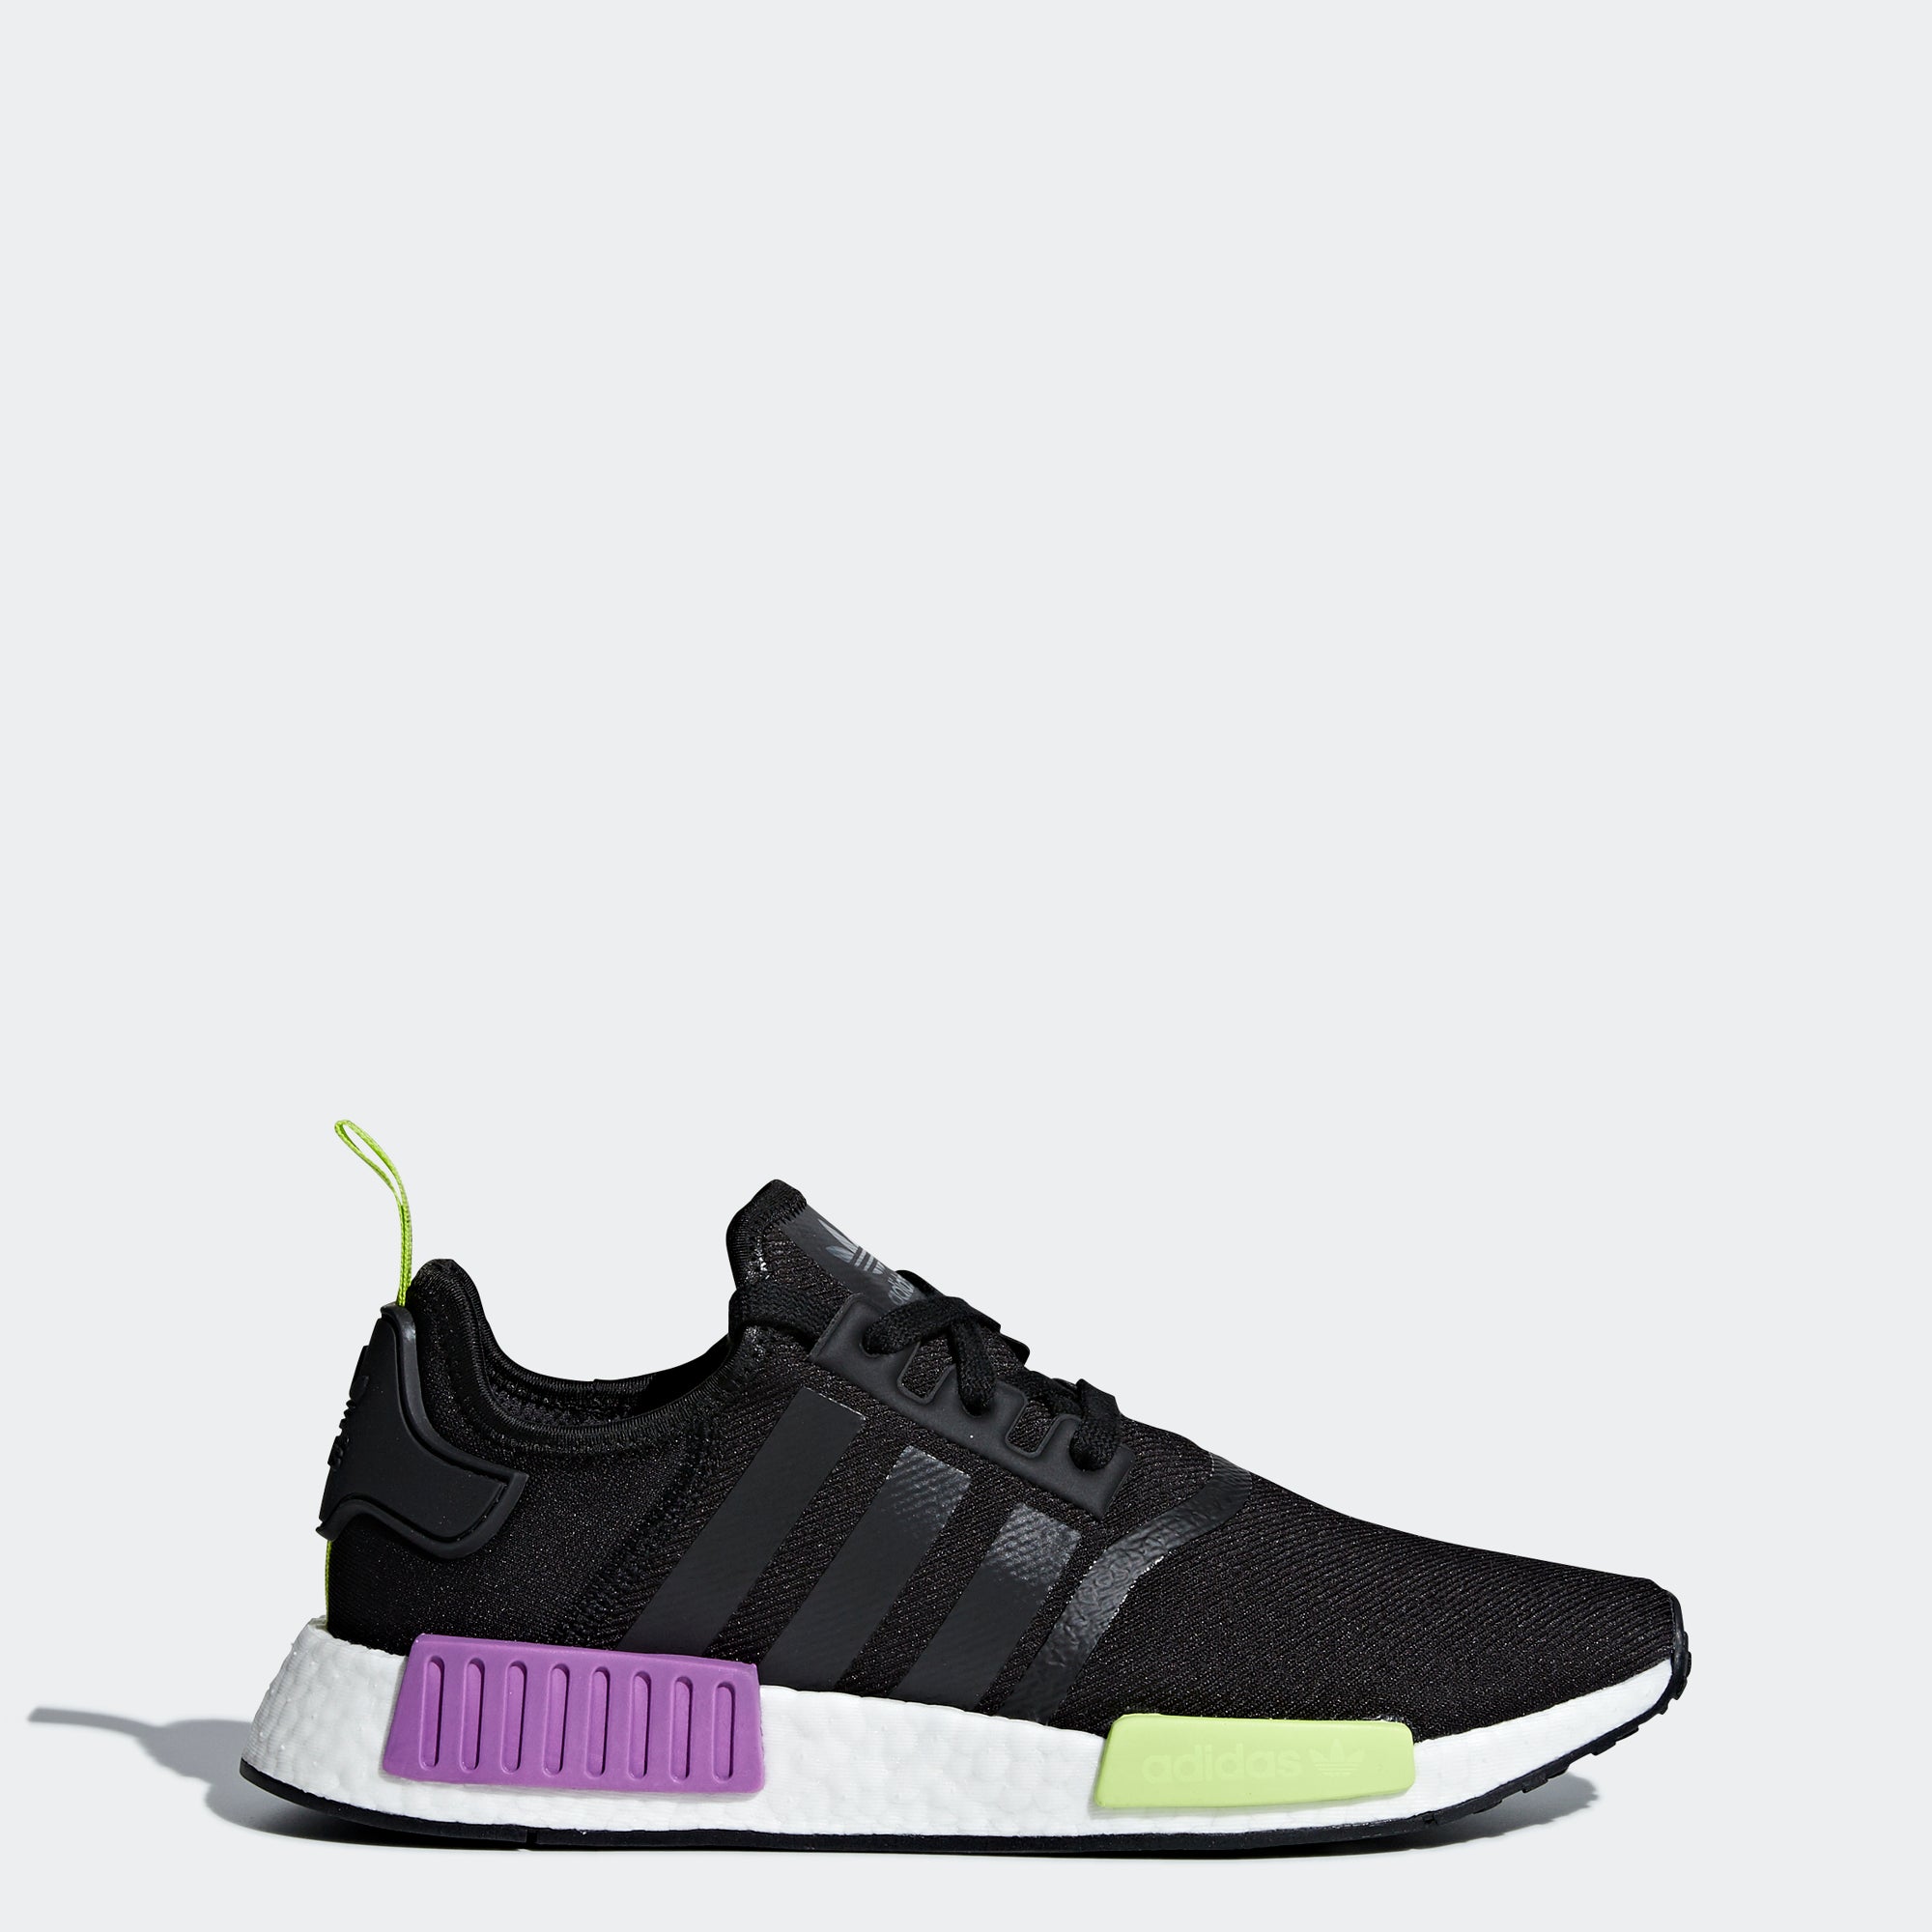 adidas nmd_r1 shoes men's